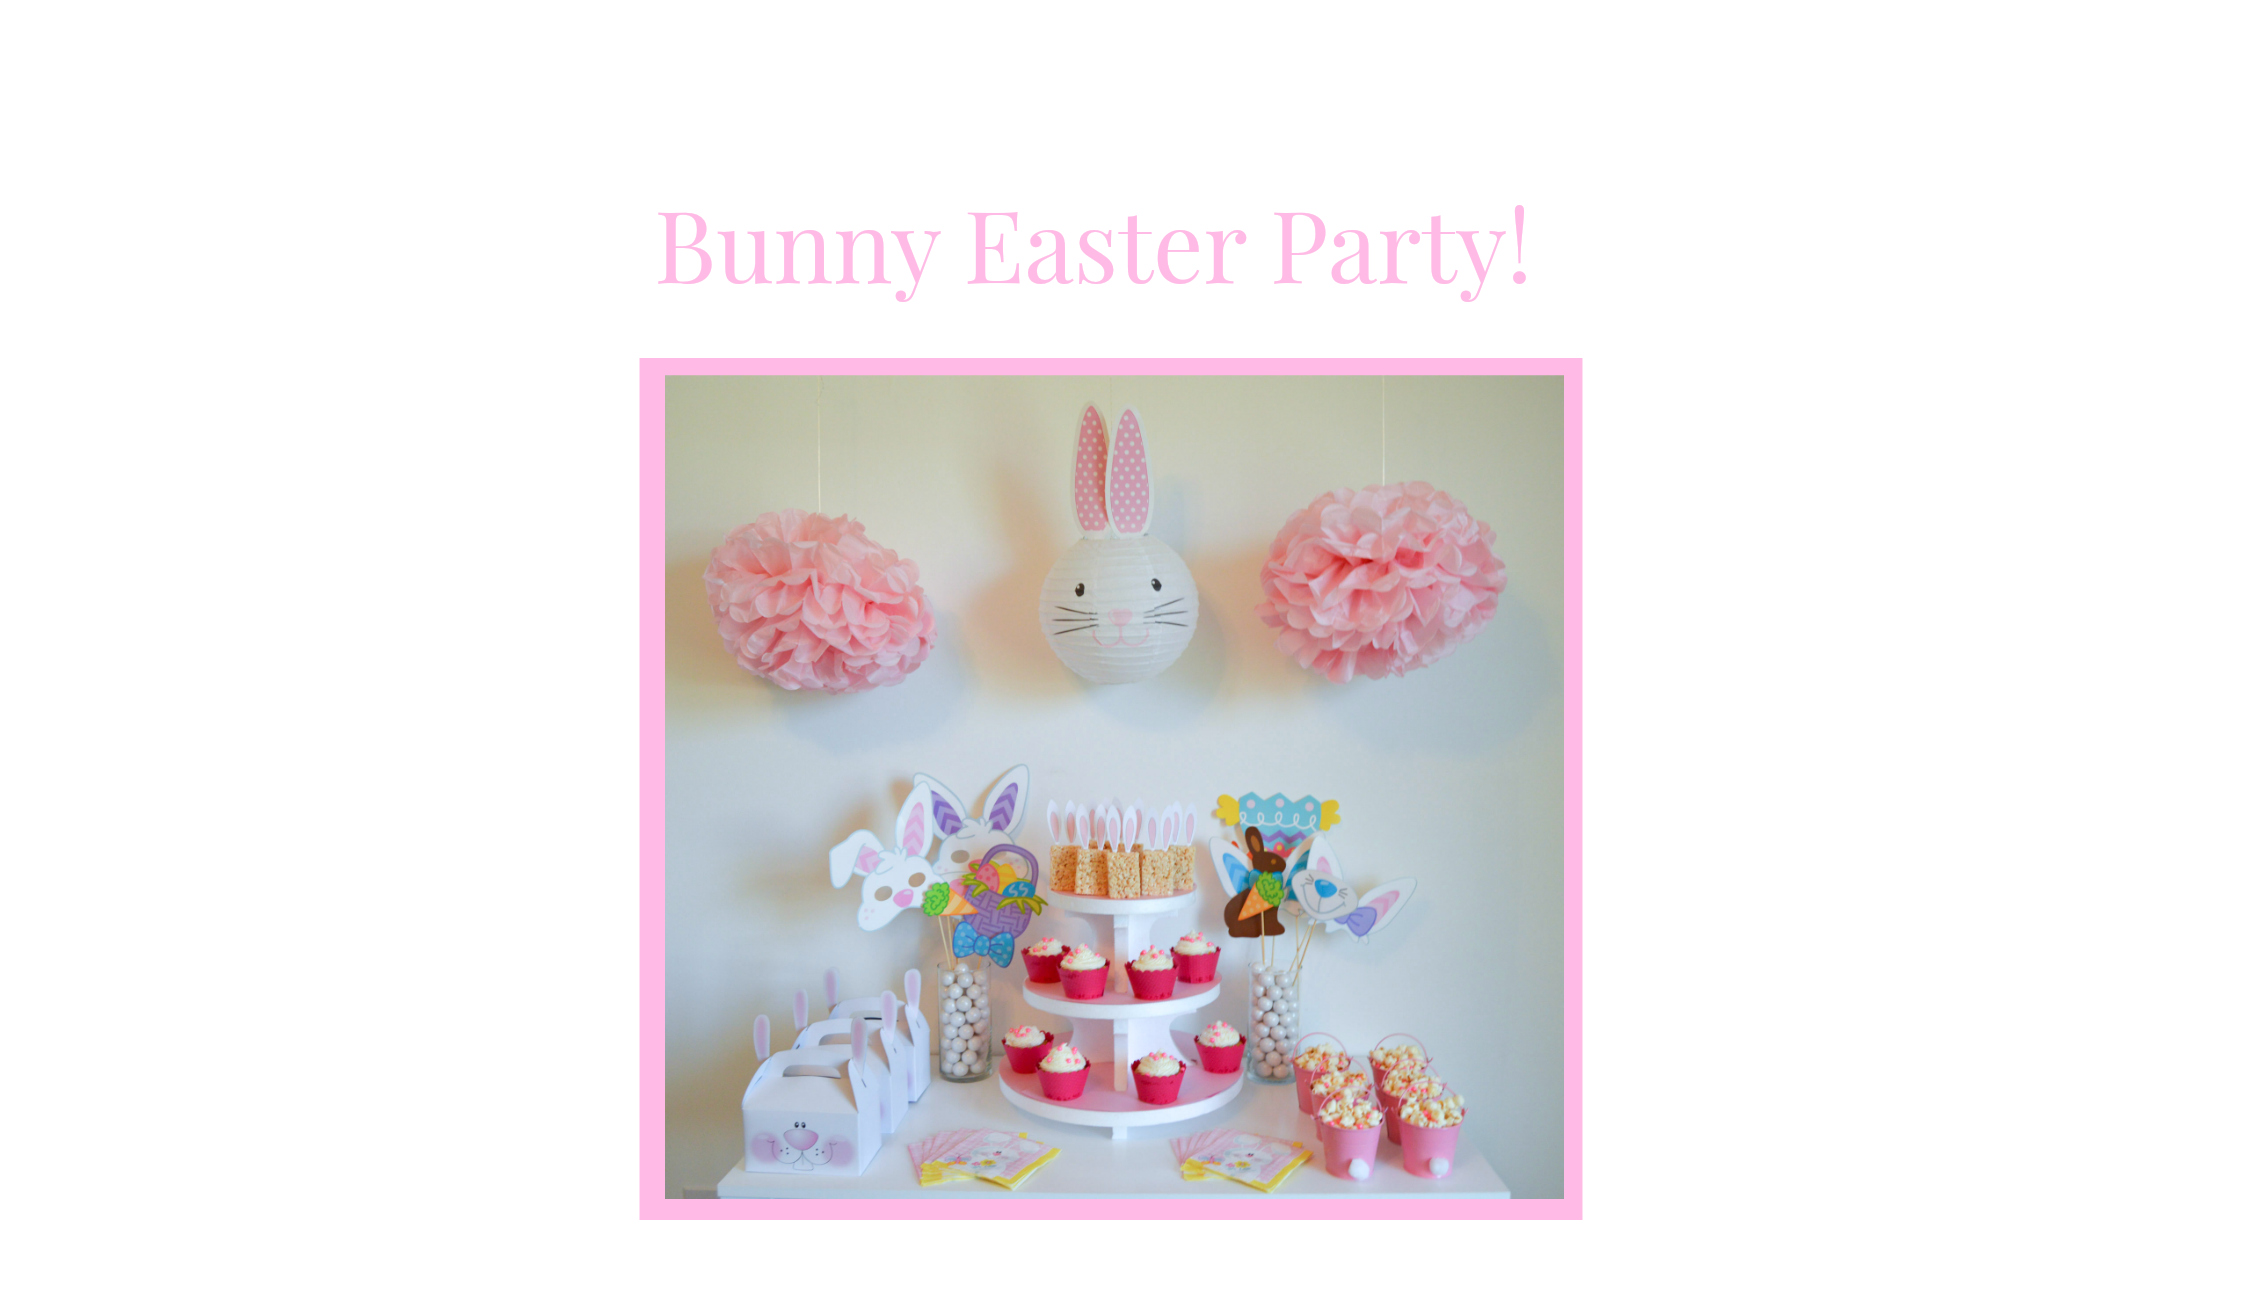 Bunny Easter party www.celebrateindetail.com